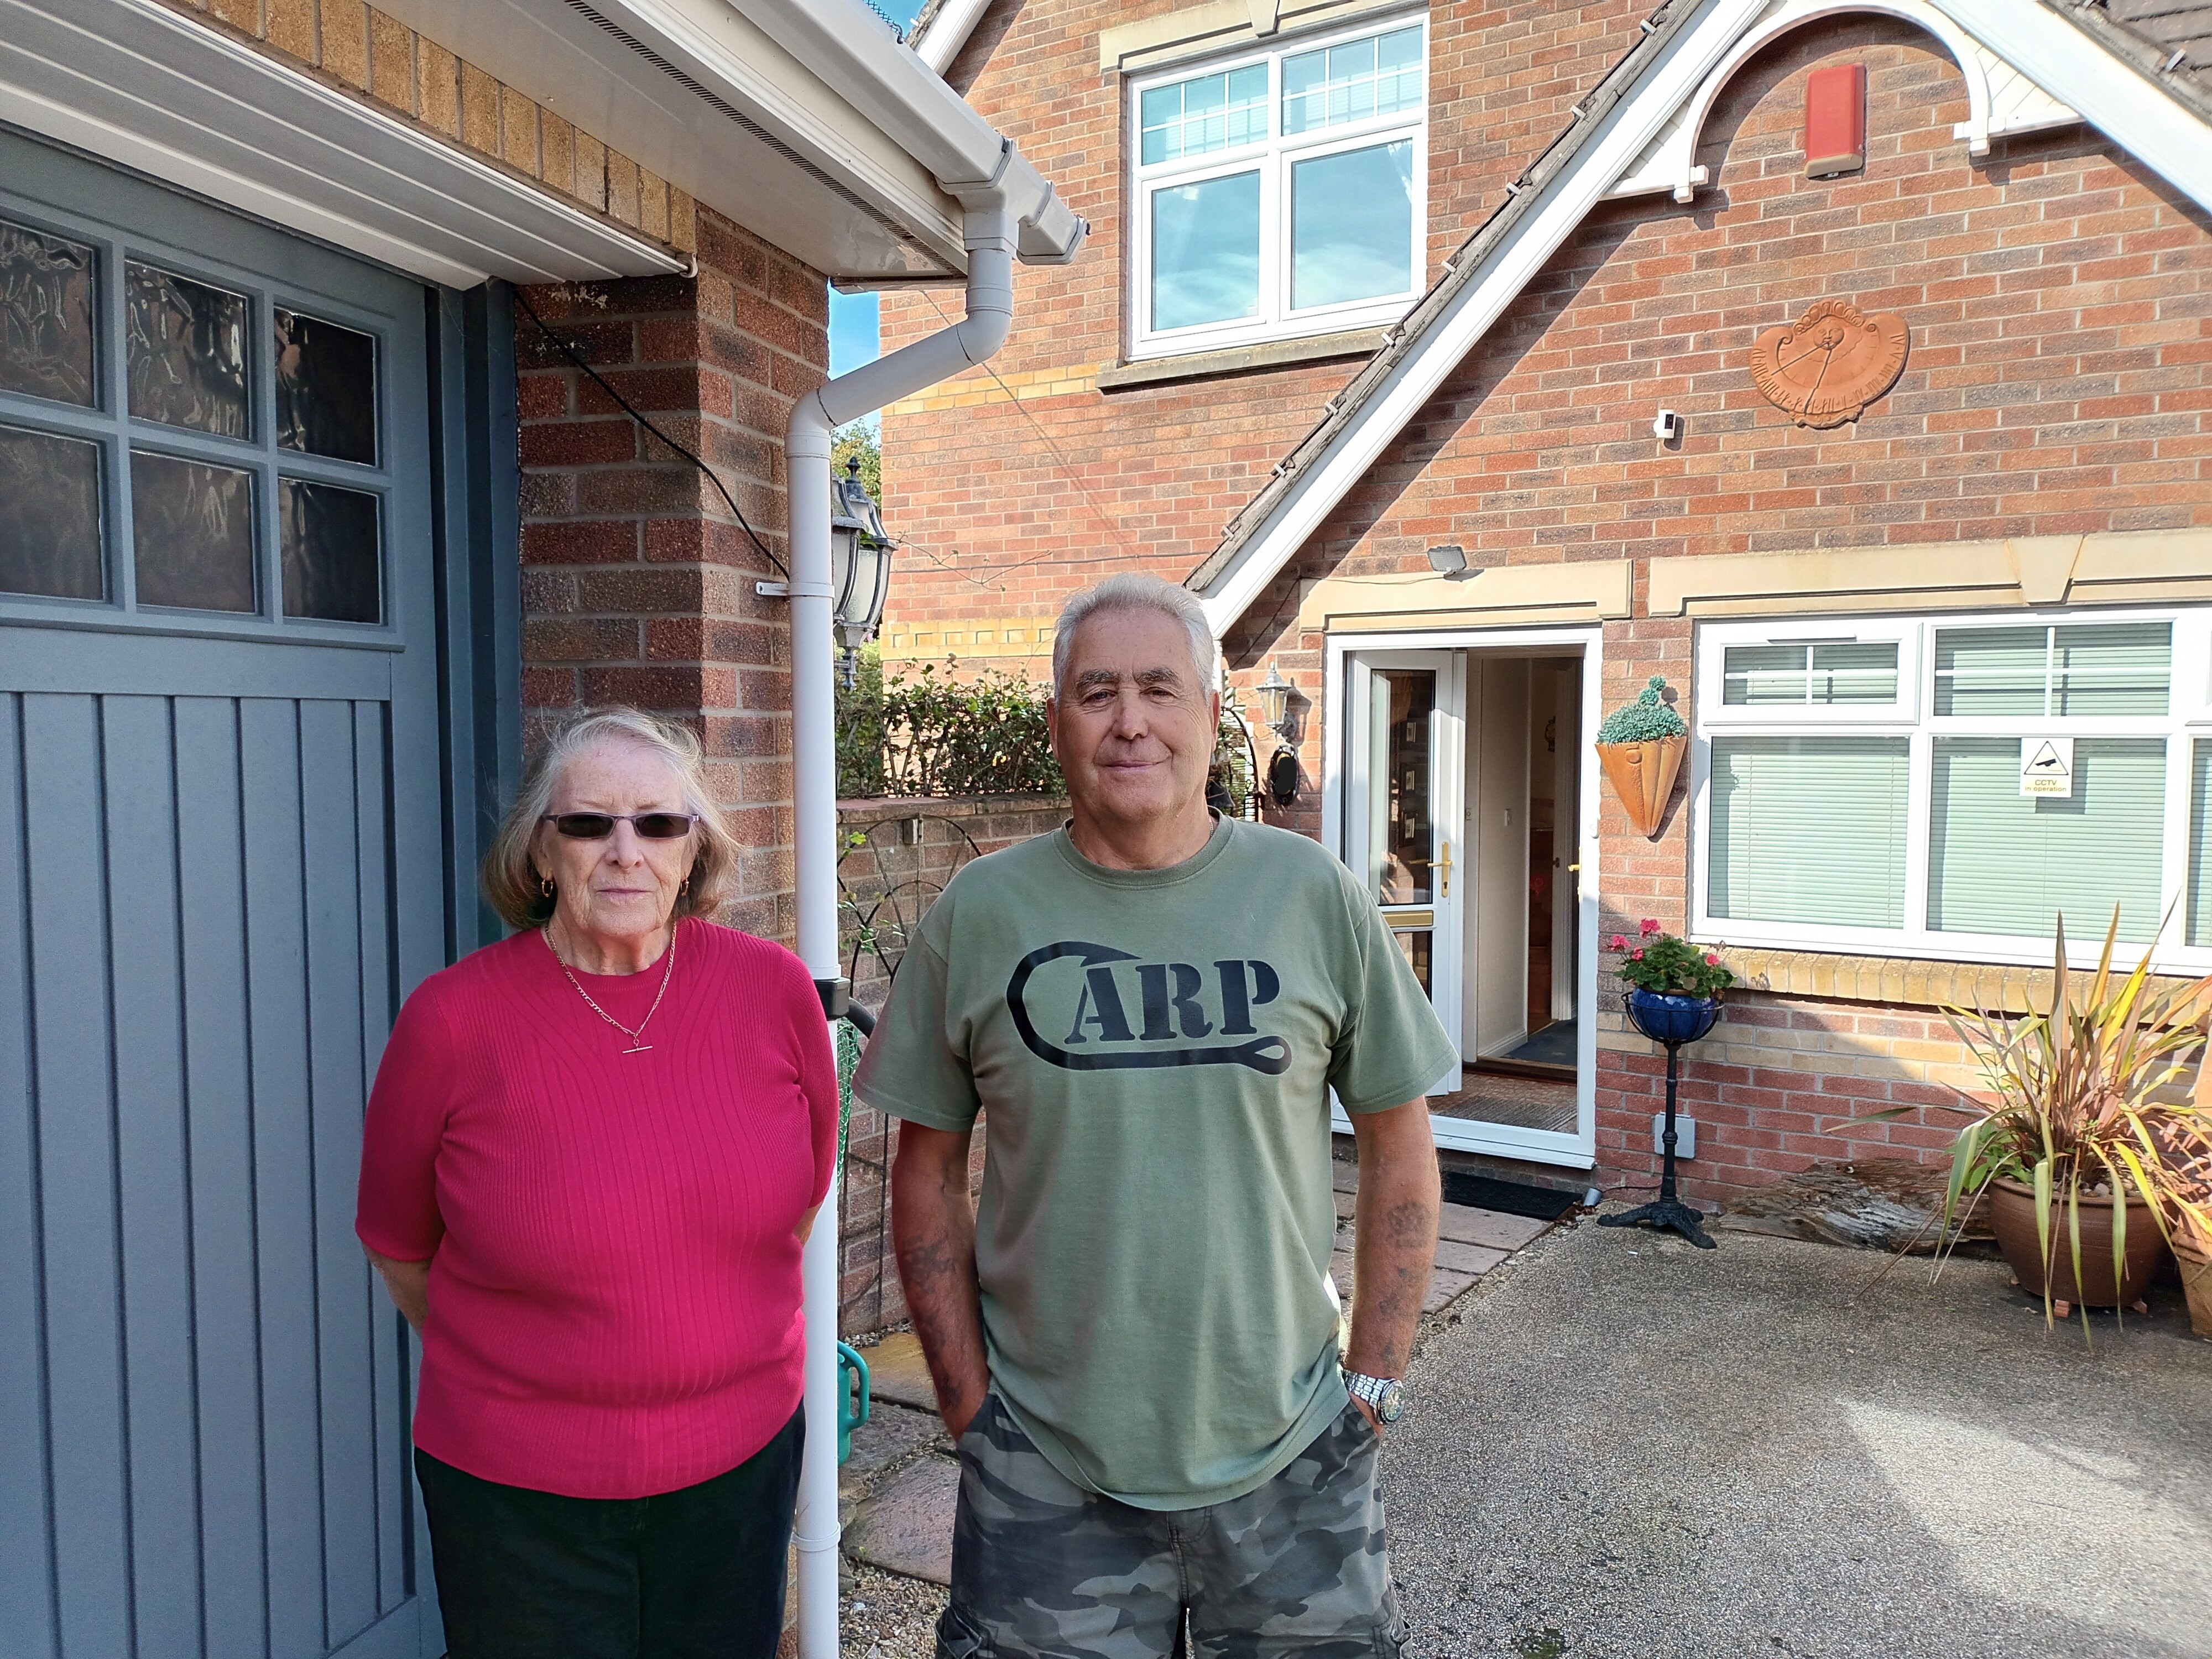 Graham Underdown MBE and his wife Jean who have been living with a footpath running up their driveway on Clos Cwm Barri for more than 20 years